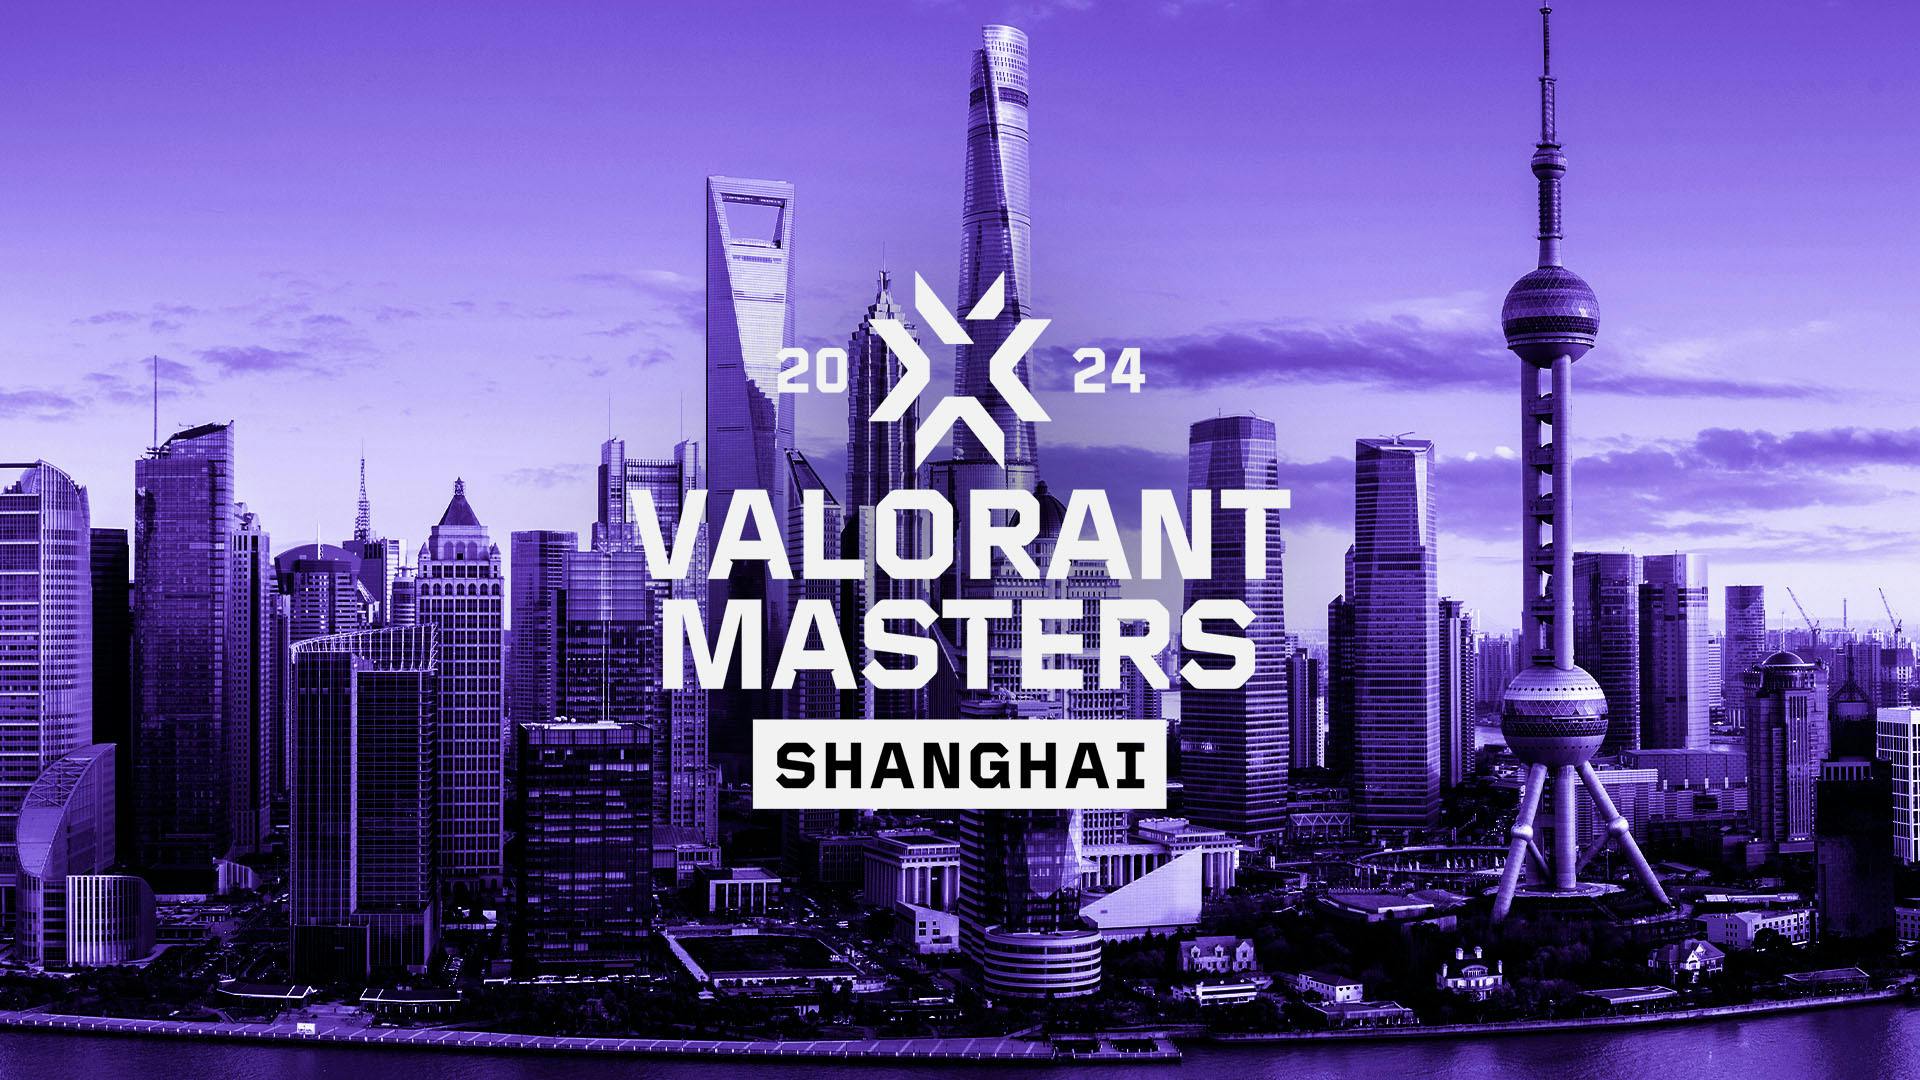 Mercedes Benz Arena to host VALORANT Masters Shanghai starting 23rd May